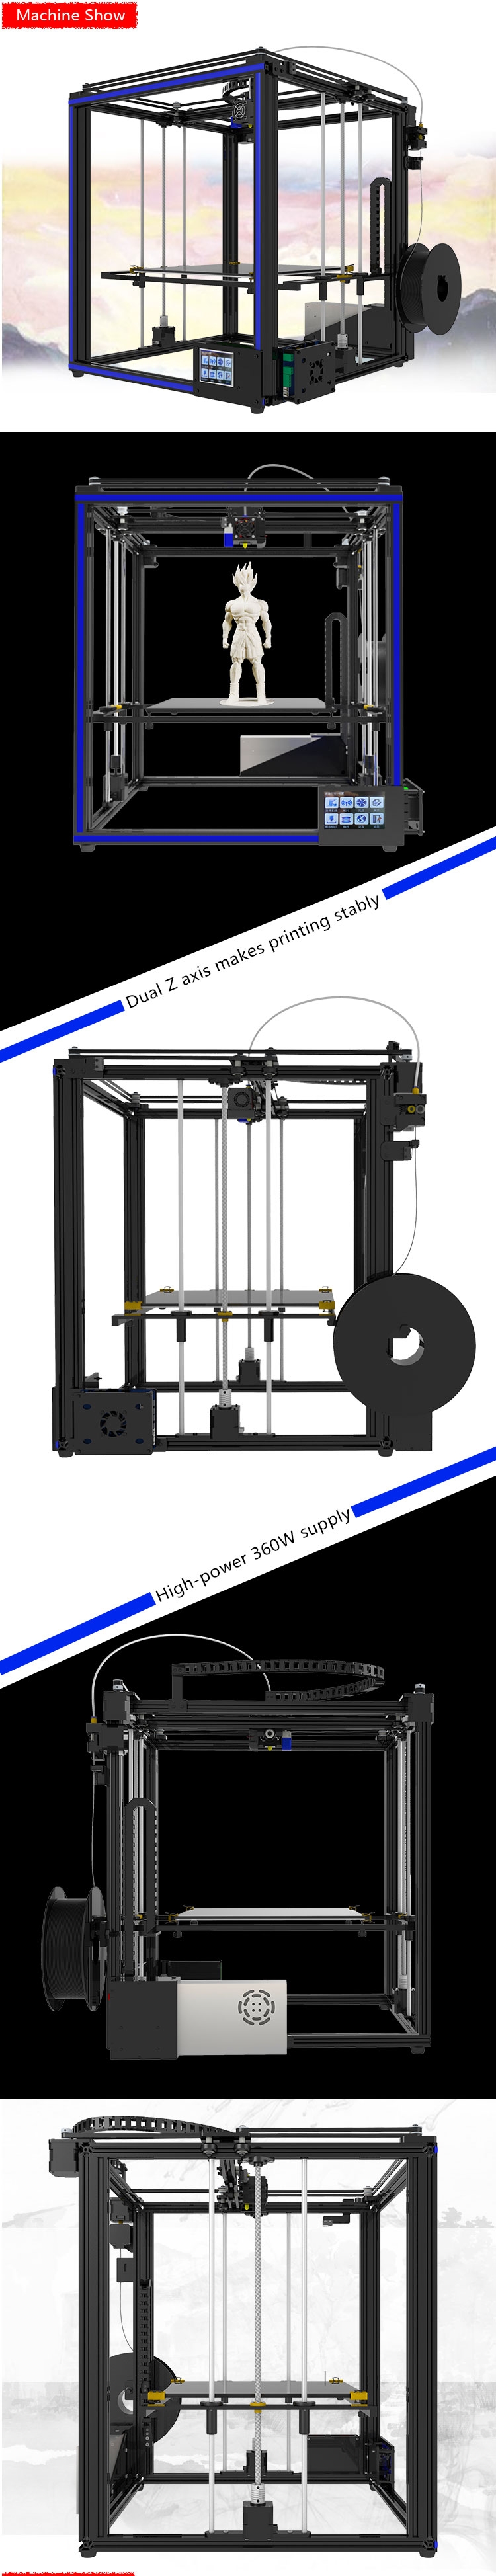 TRONXY® X5SA DIY Aluminium 3D Printer 330*330*400mm Printing Size With Updated Touch Screen/Auto Leveling/Dual Z-axis/Power Resume 43